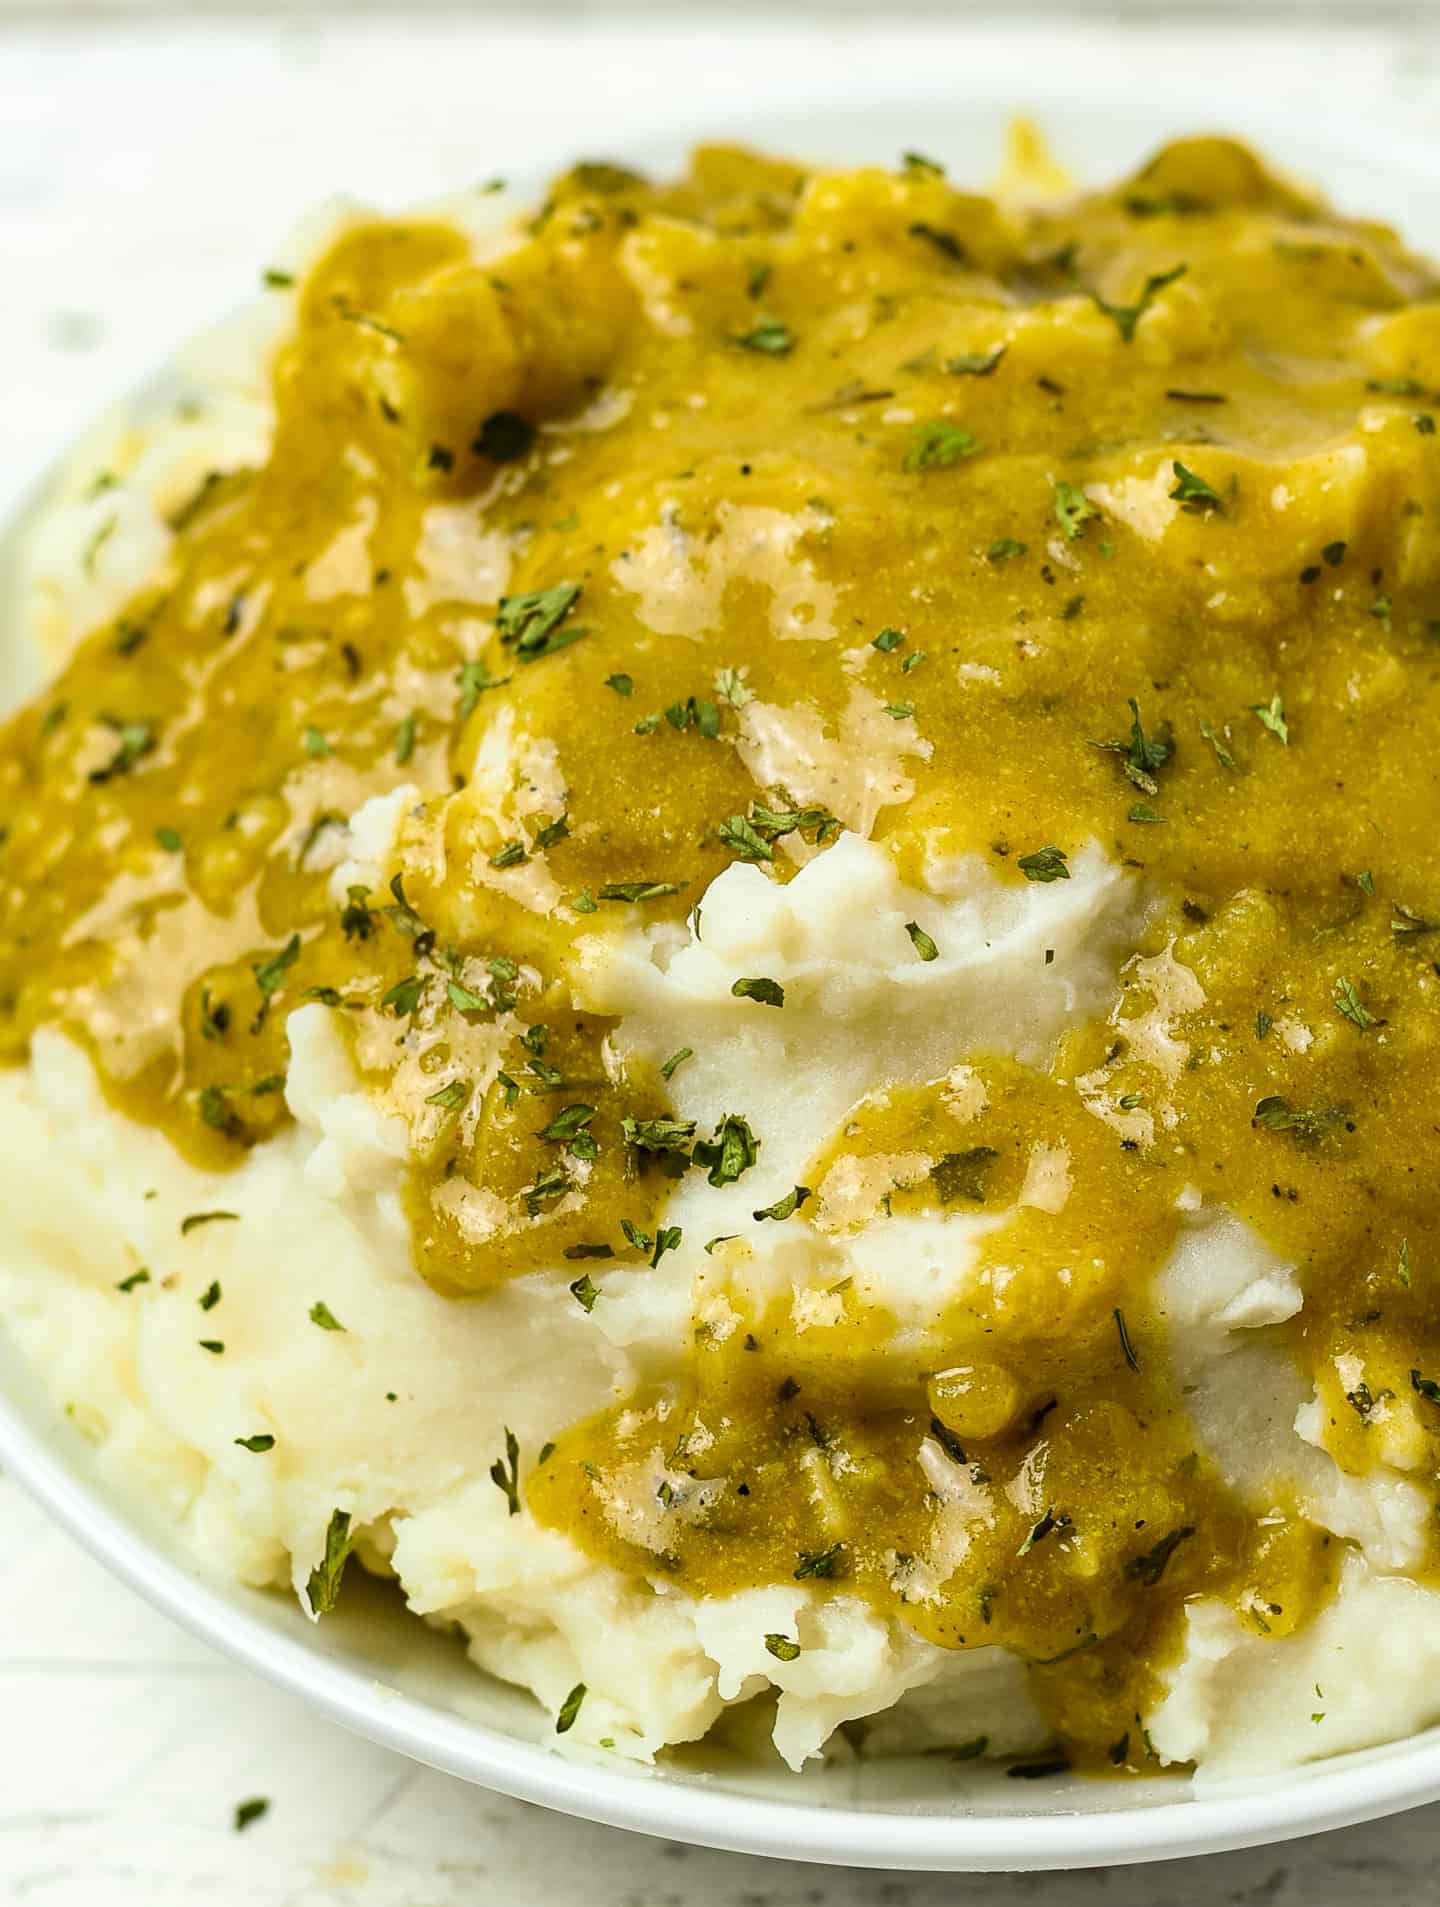 Mashed potatoes and gravy.